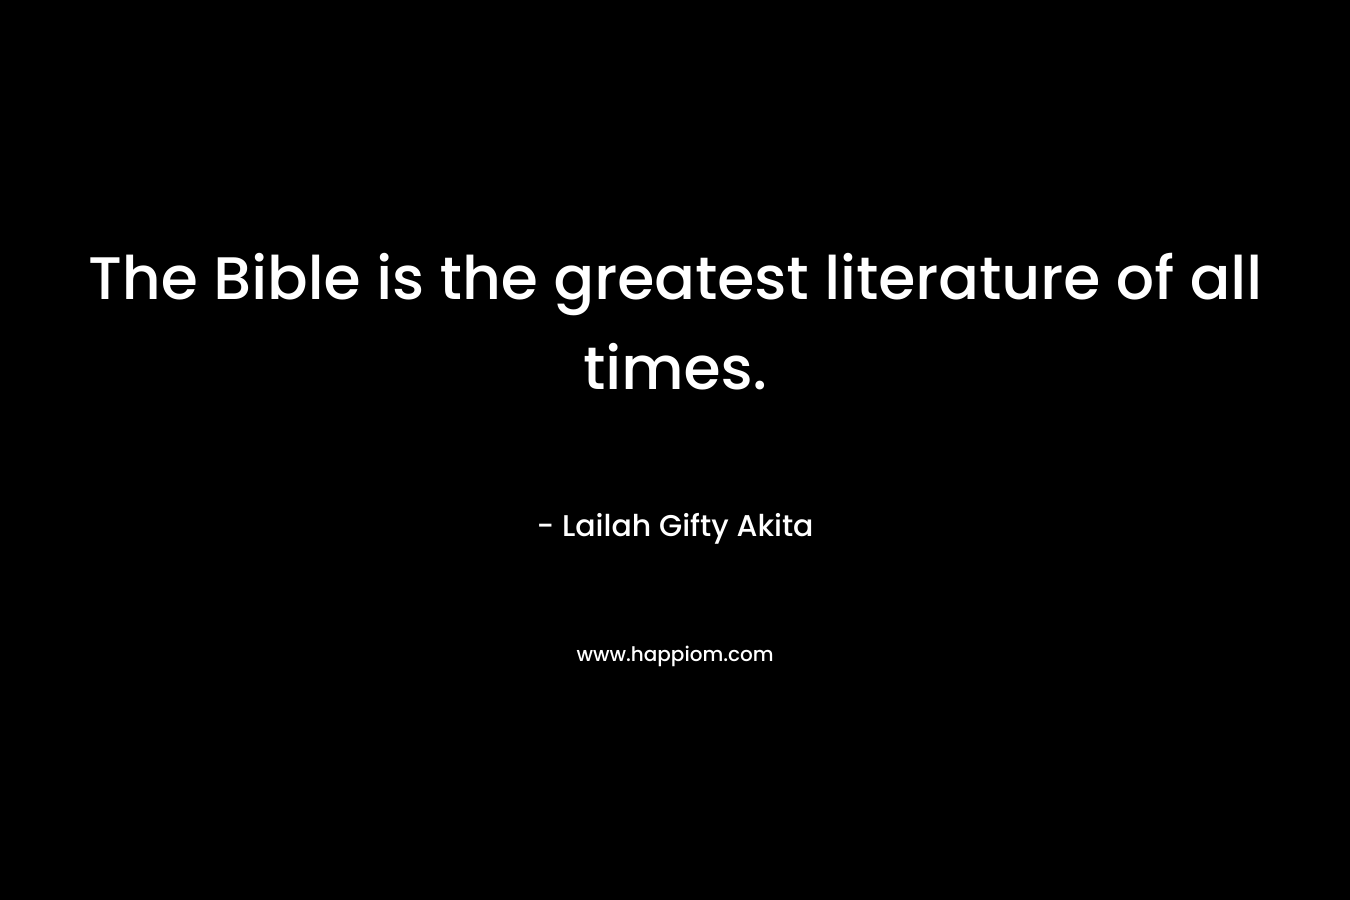 The Bible is the greatest literature of all times.